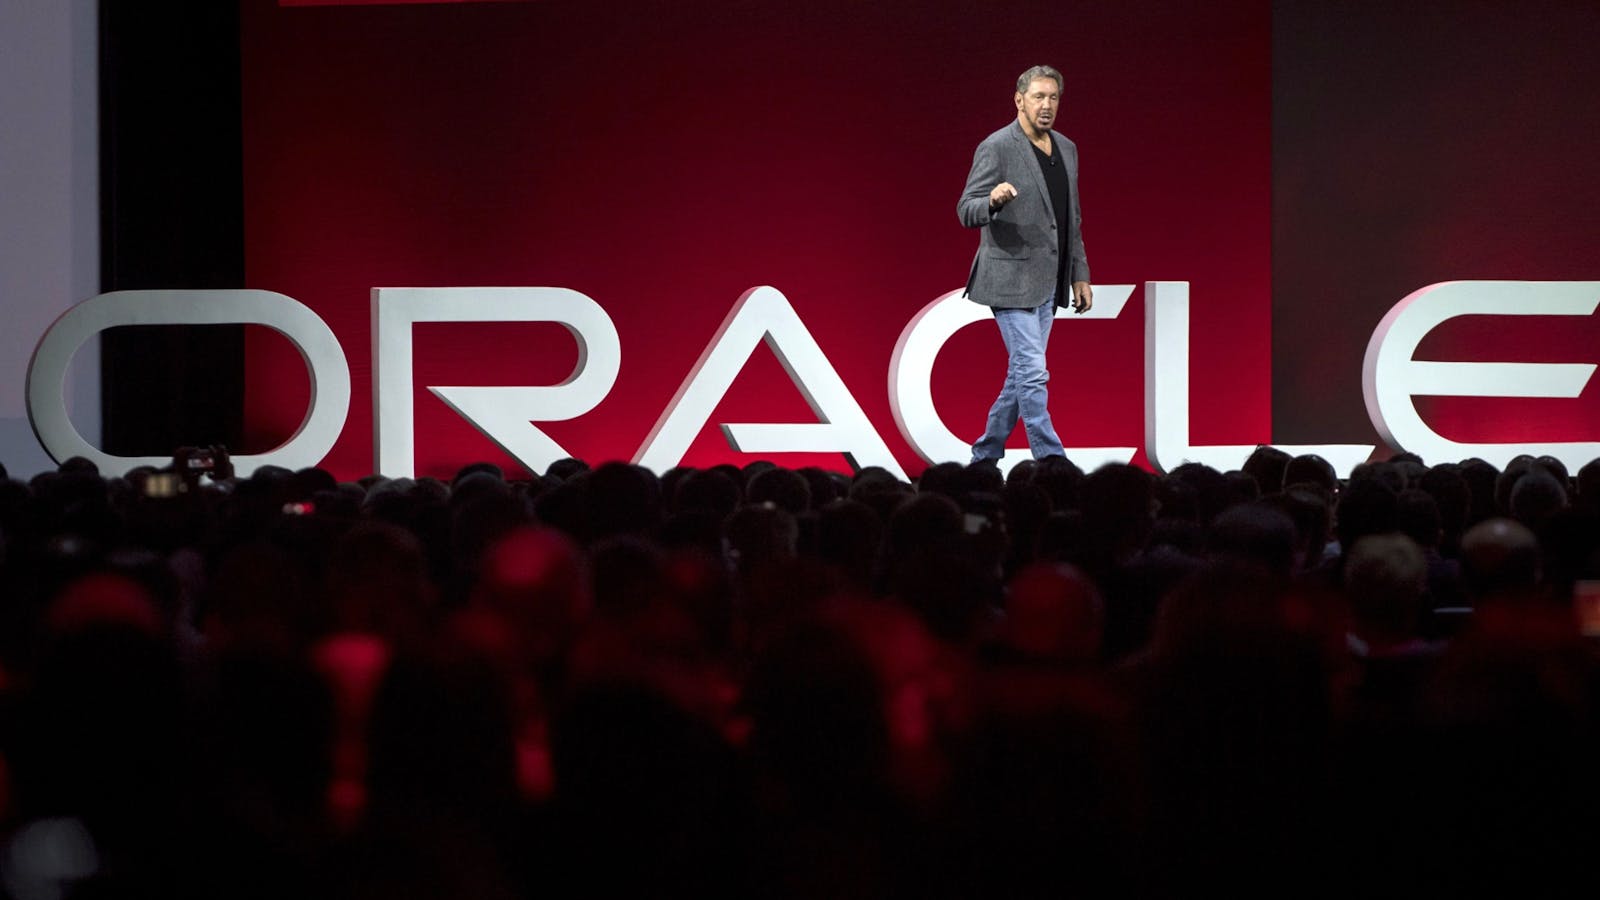 Oracle co-founder Larry Ellison in 2018. Photo by Bloomberg